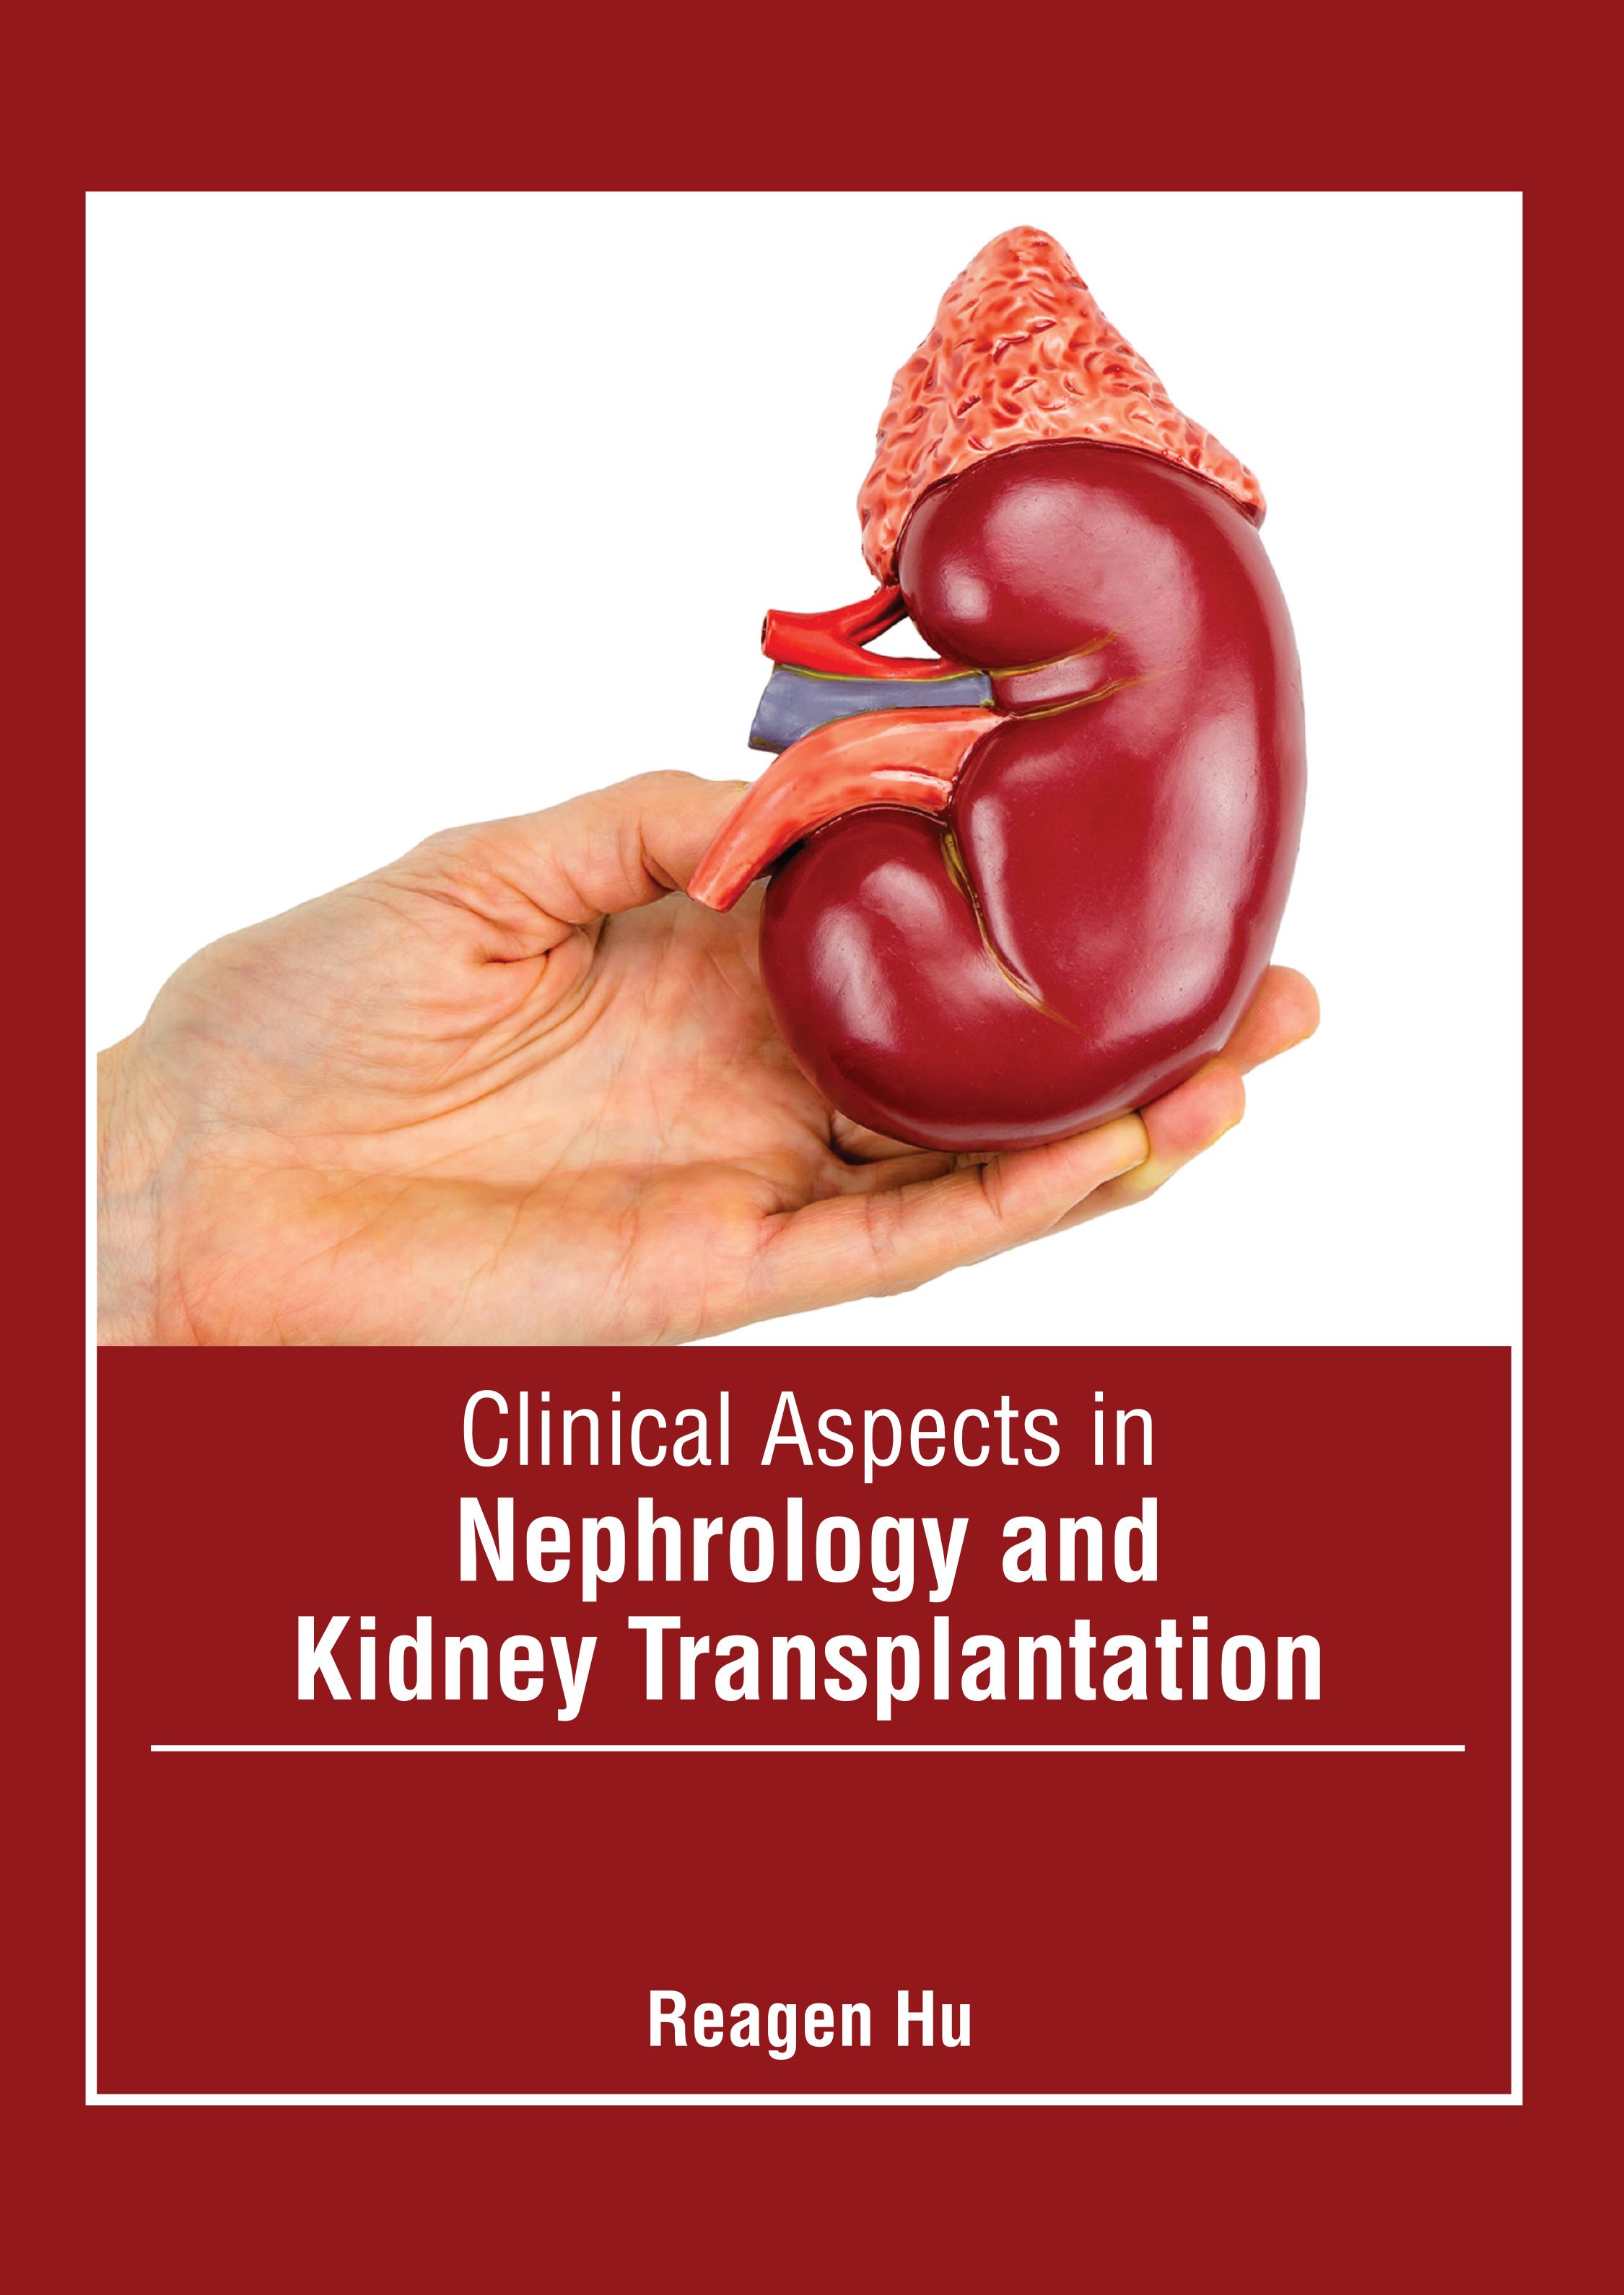 CLINICAL ASPECTS IN NEPHROLOGY AND KIDNEY TRANSPLANTATION